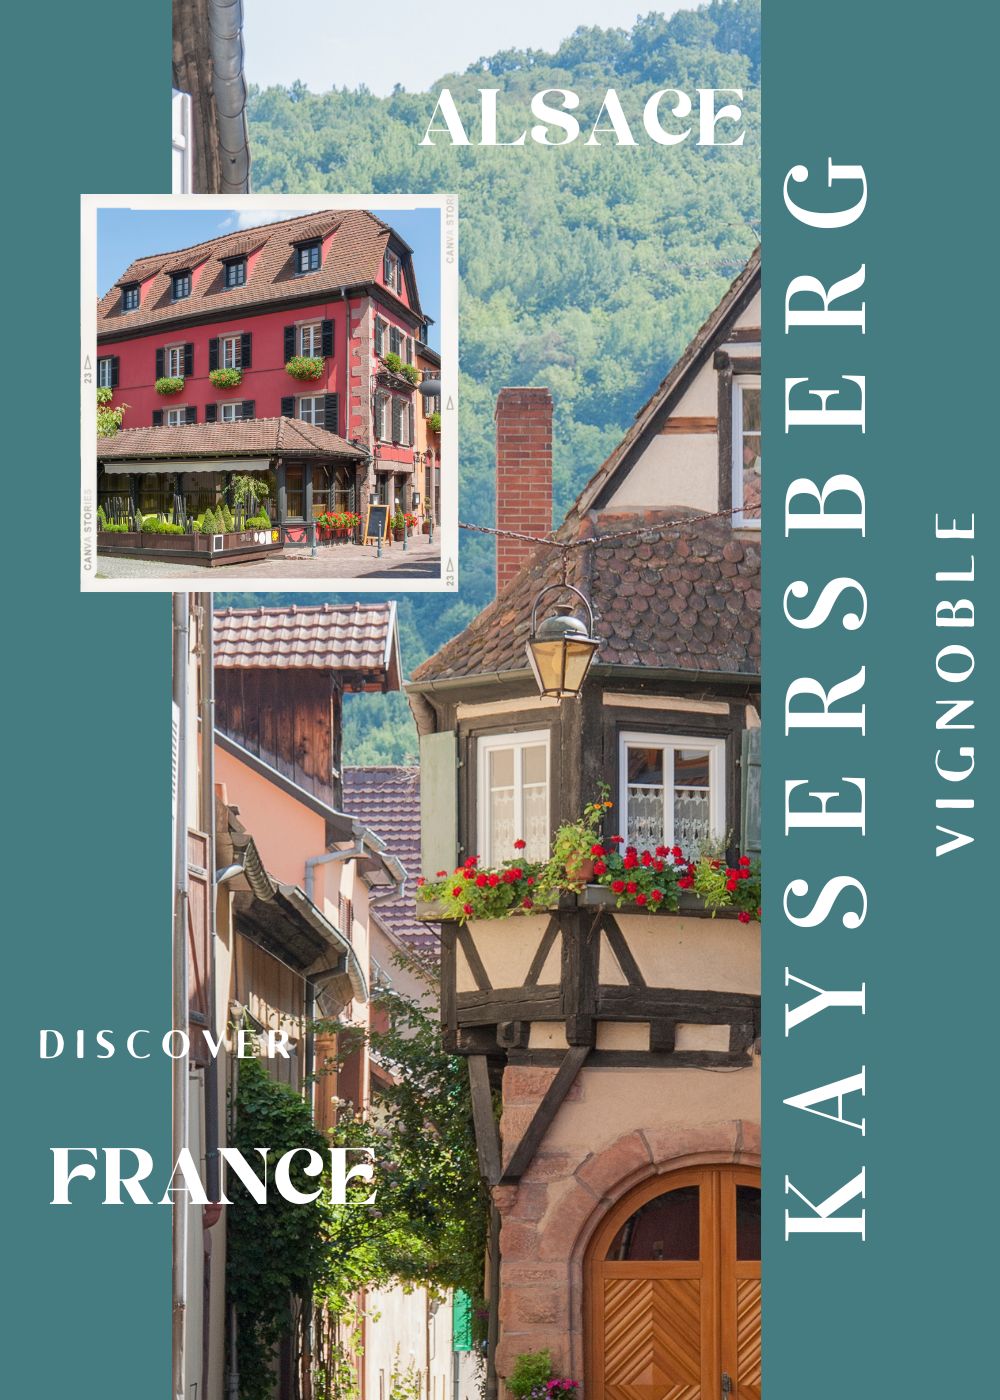 Visit Kaysersberg in Alsace France most beautiful village and travel destination